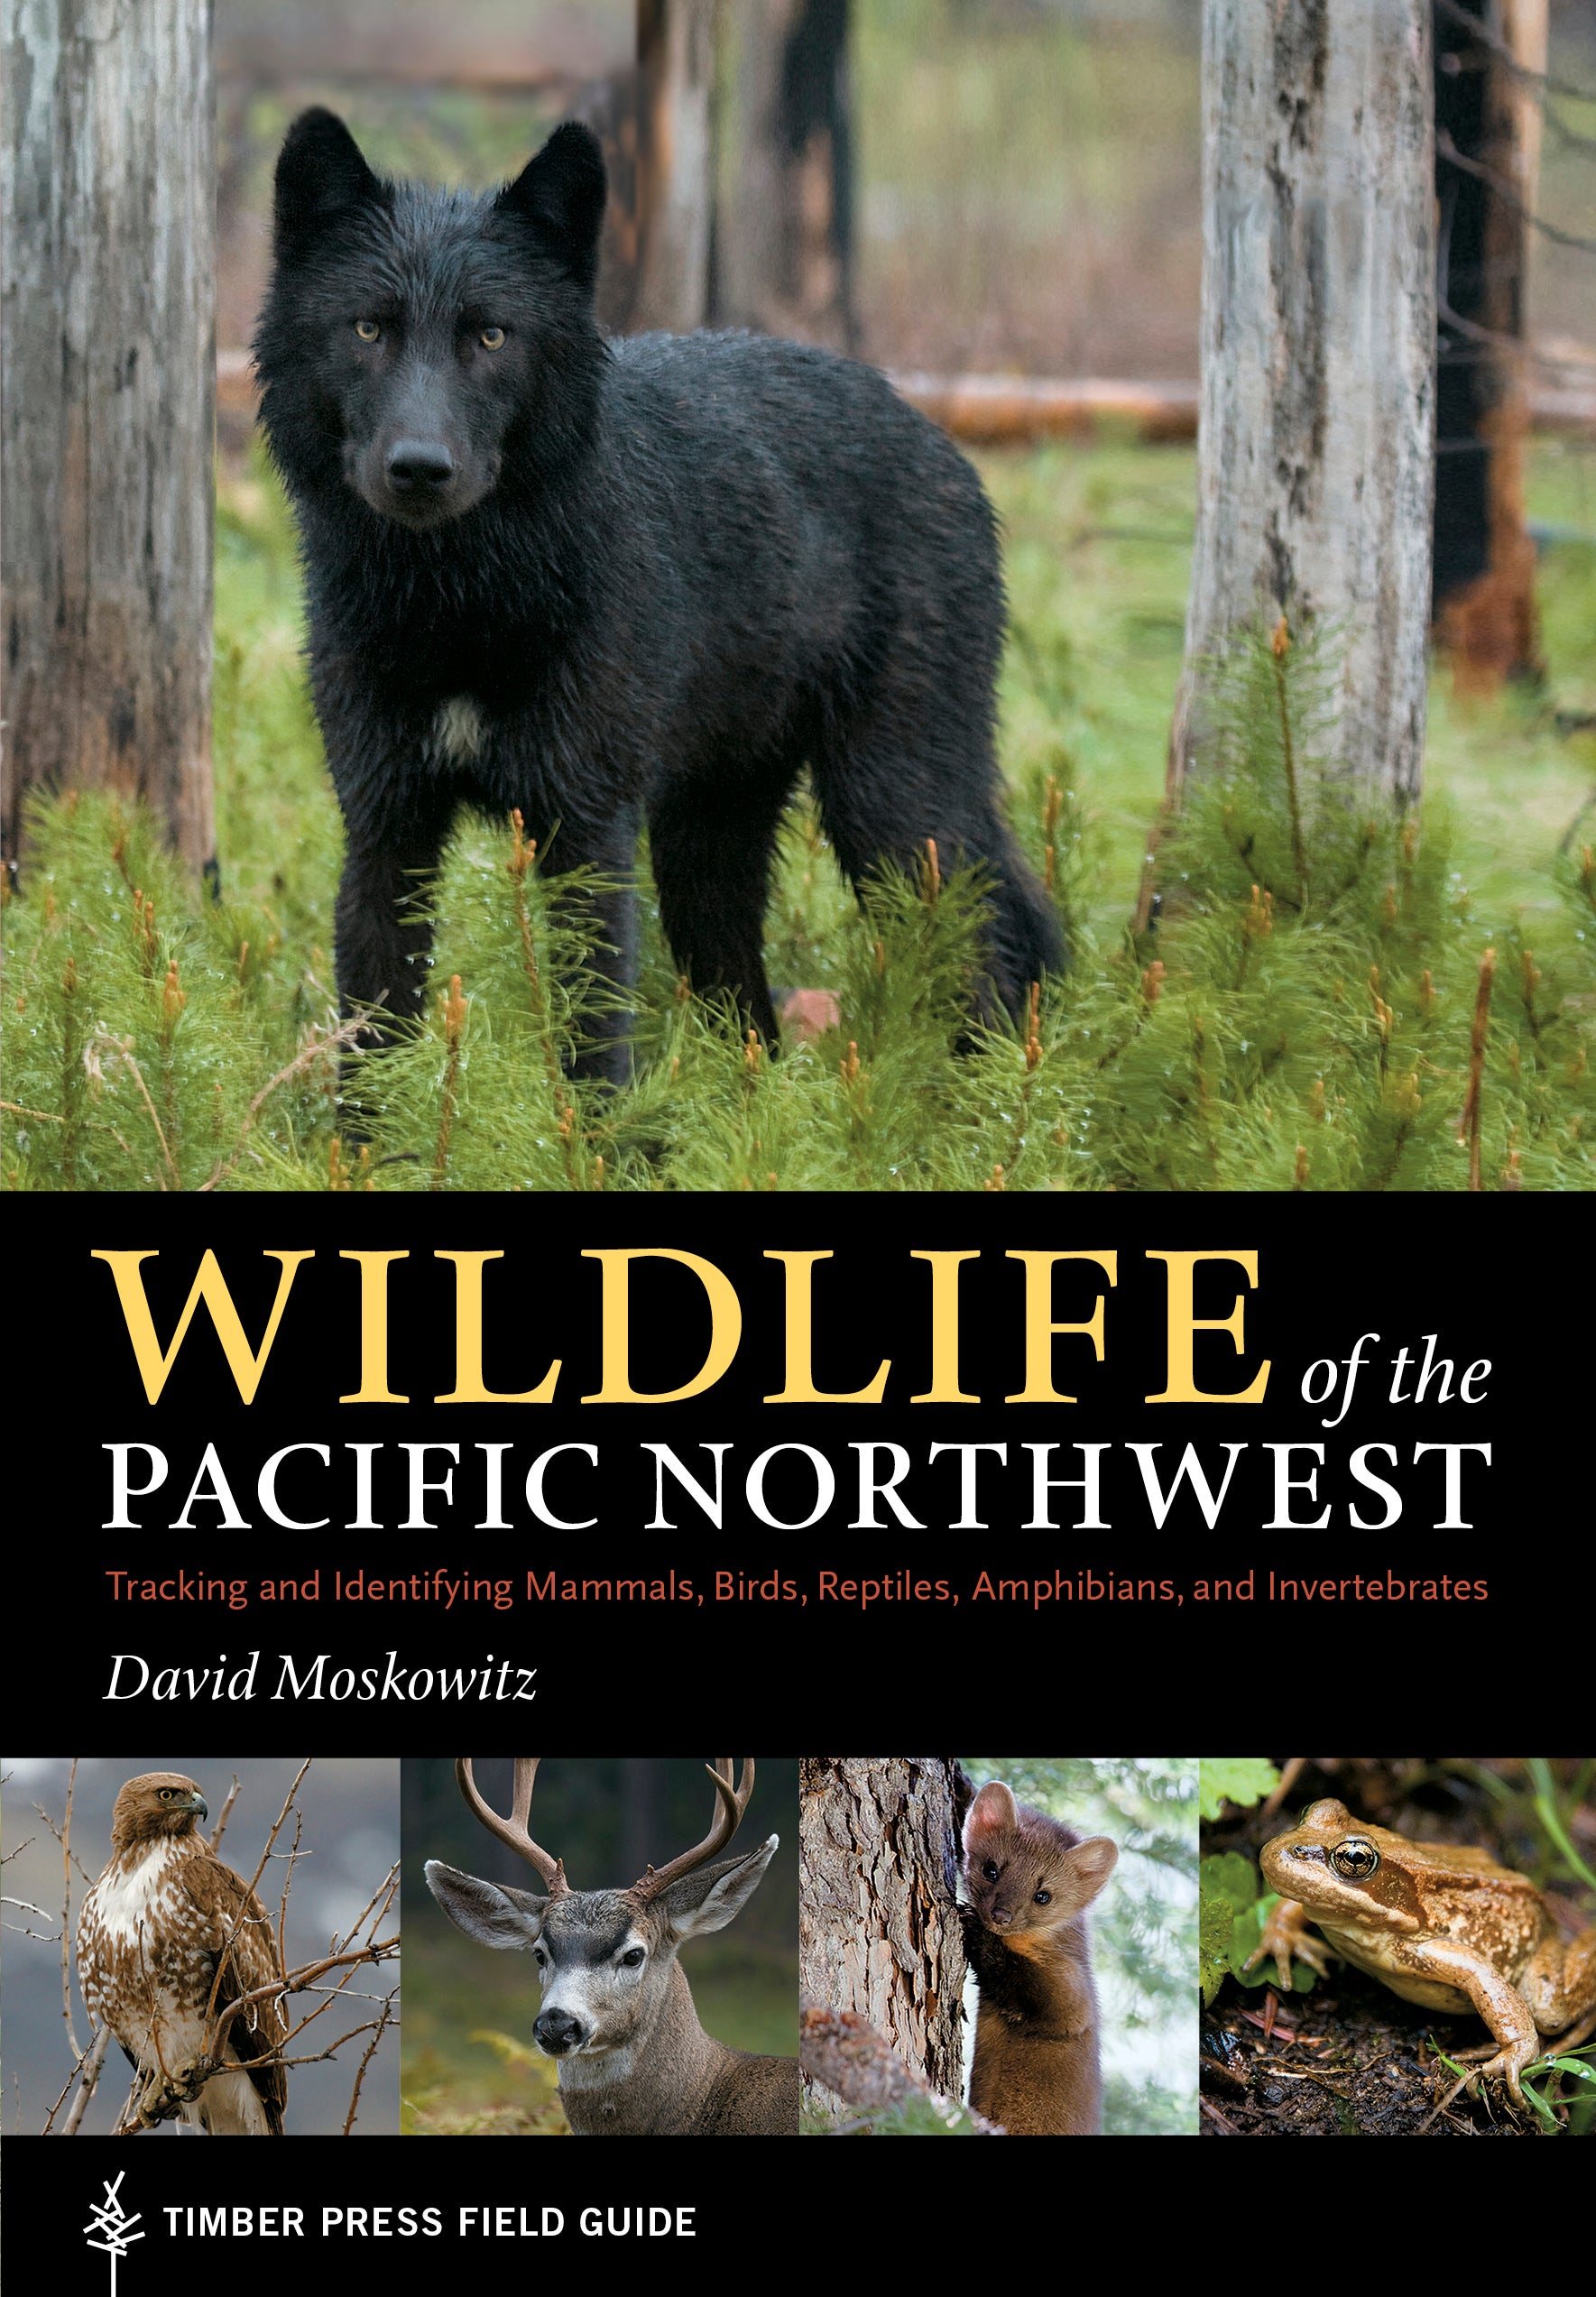 Several wildlife photos, including a wolf, deer, and hawk, decorate the cover.